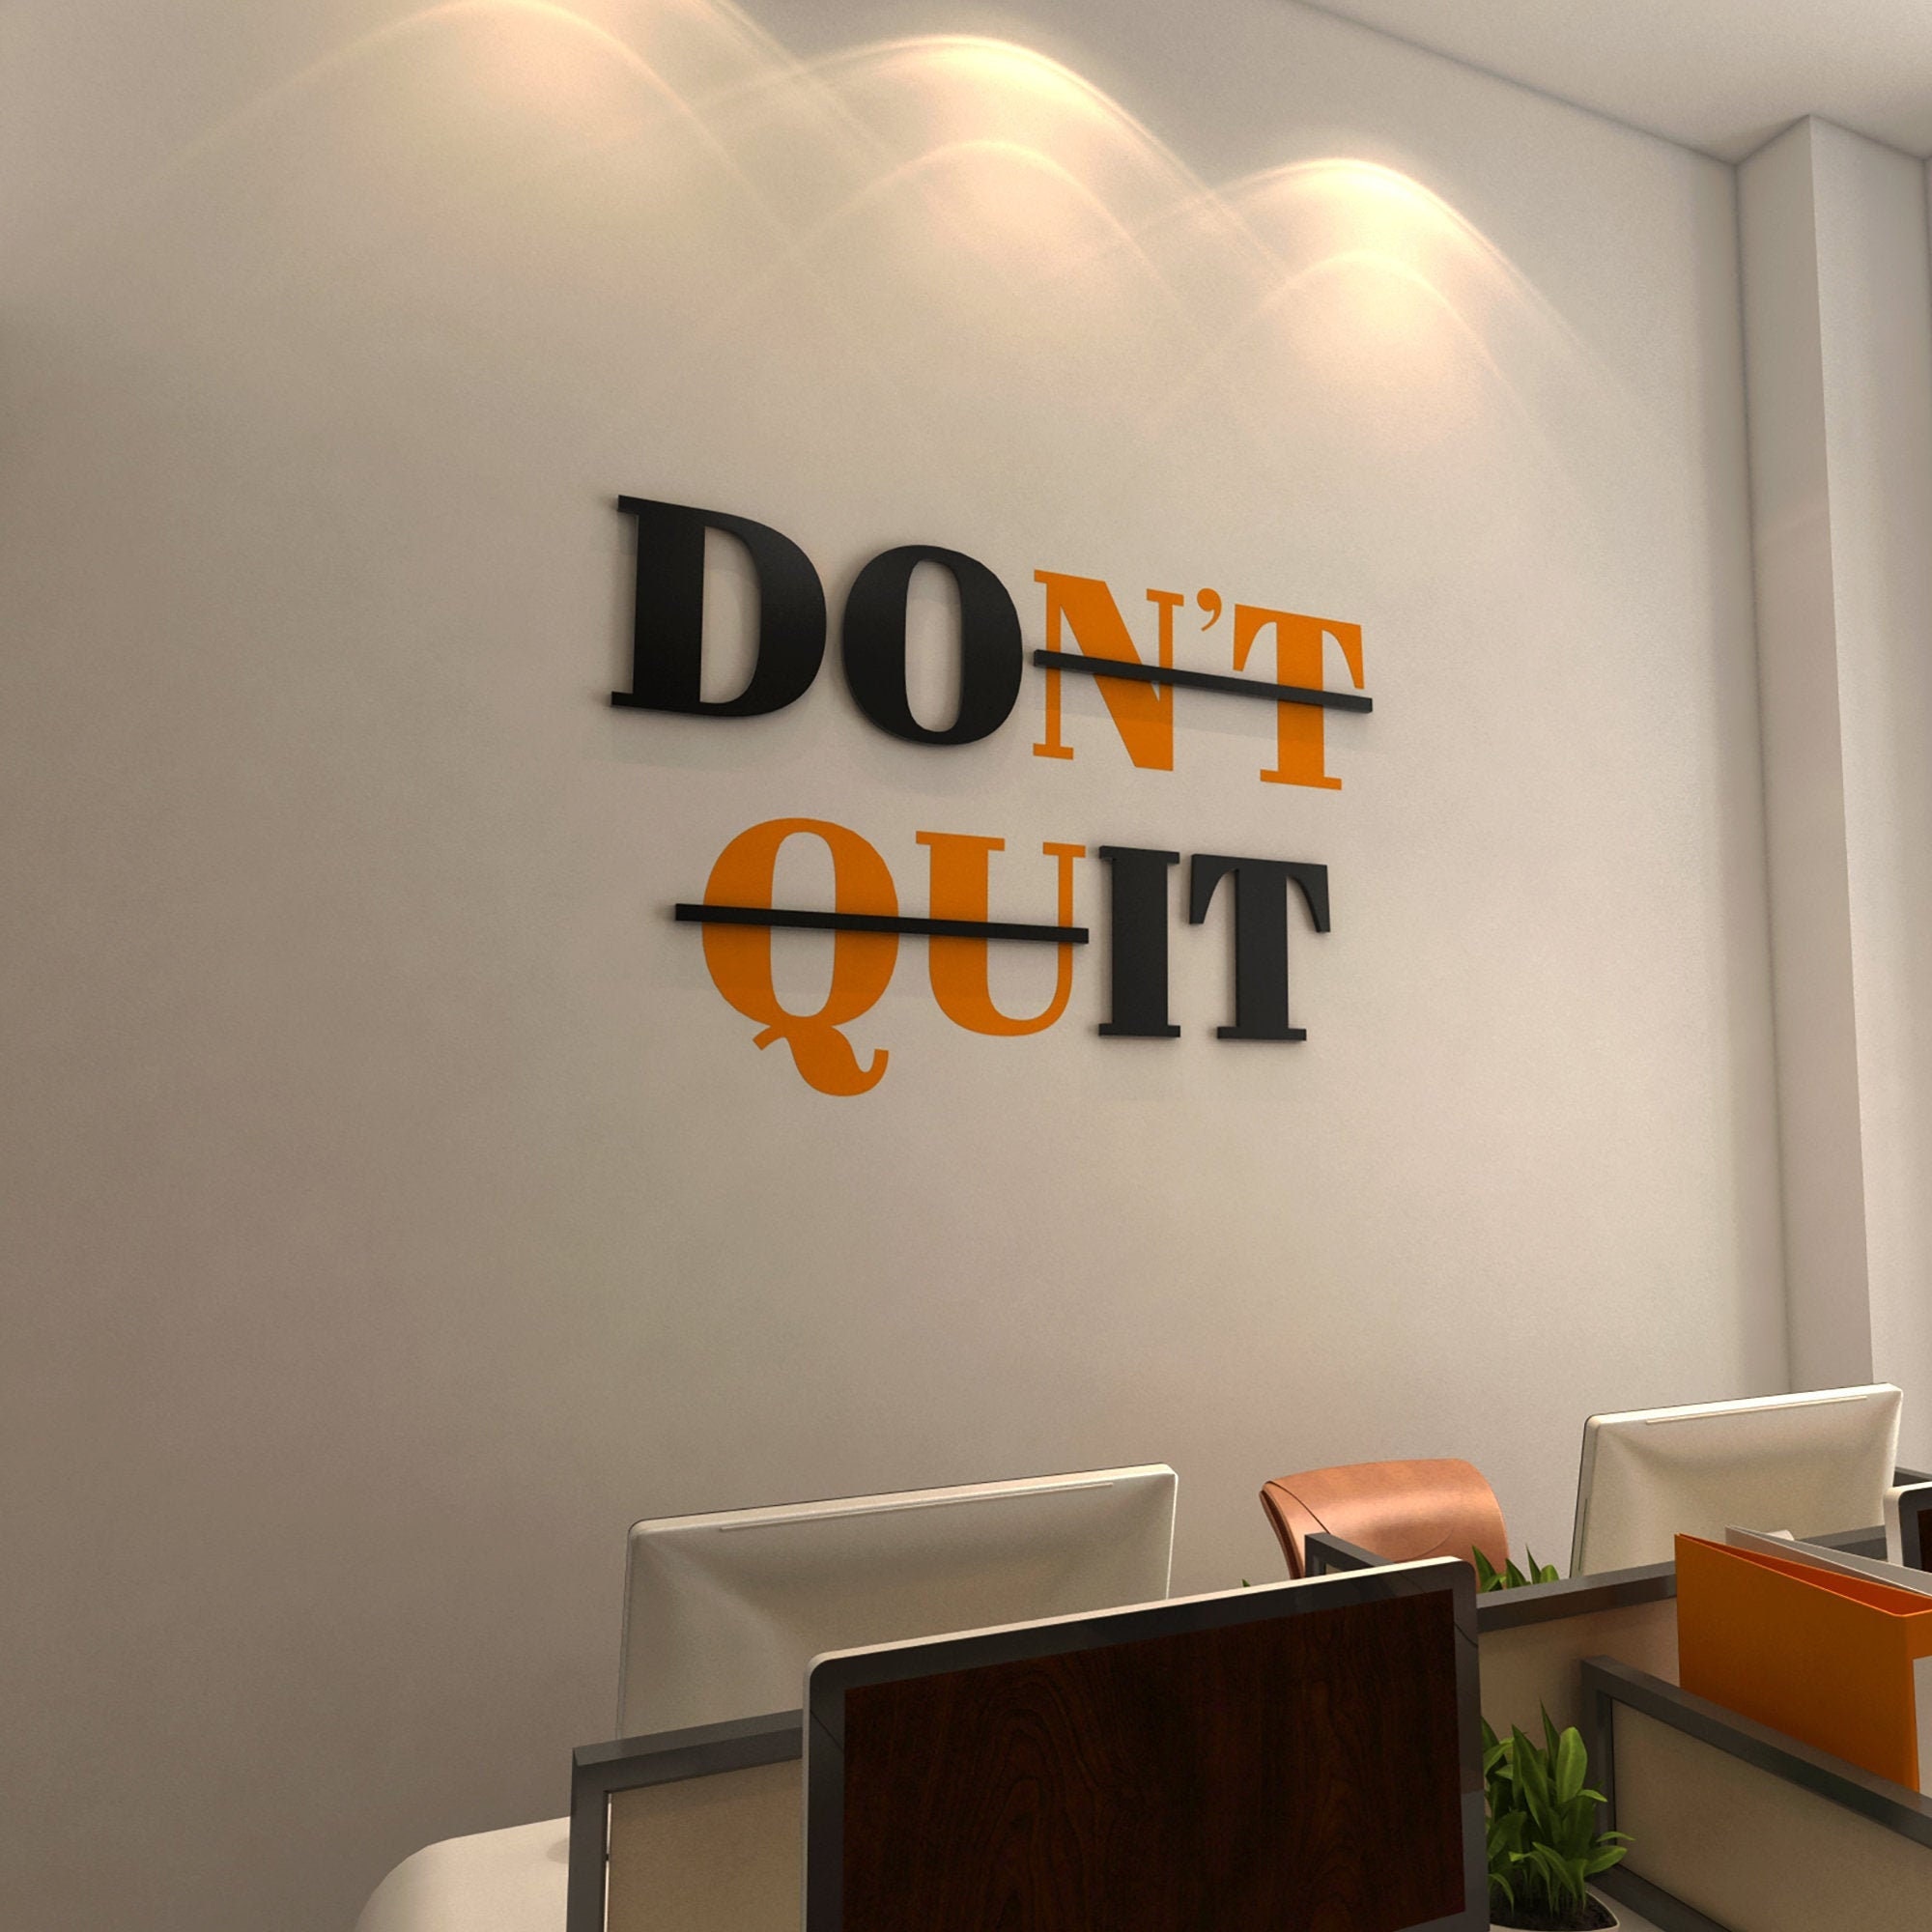 Dont Quit, Do It, Motivational Sign, Gym Office Decor, 3D Wall Decor, Gym  Wall Design, Inspirational Quotes, SKU:DNTQ - Etsy